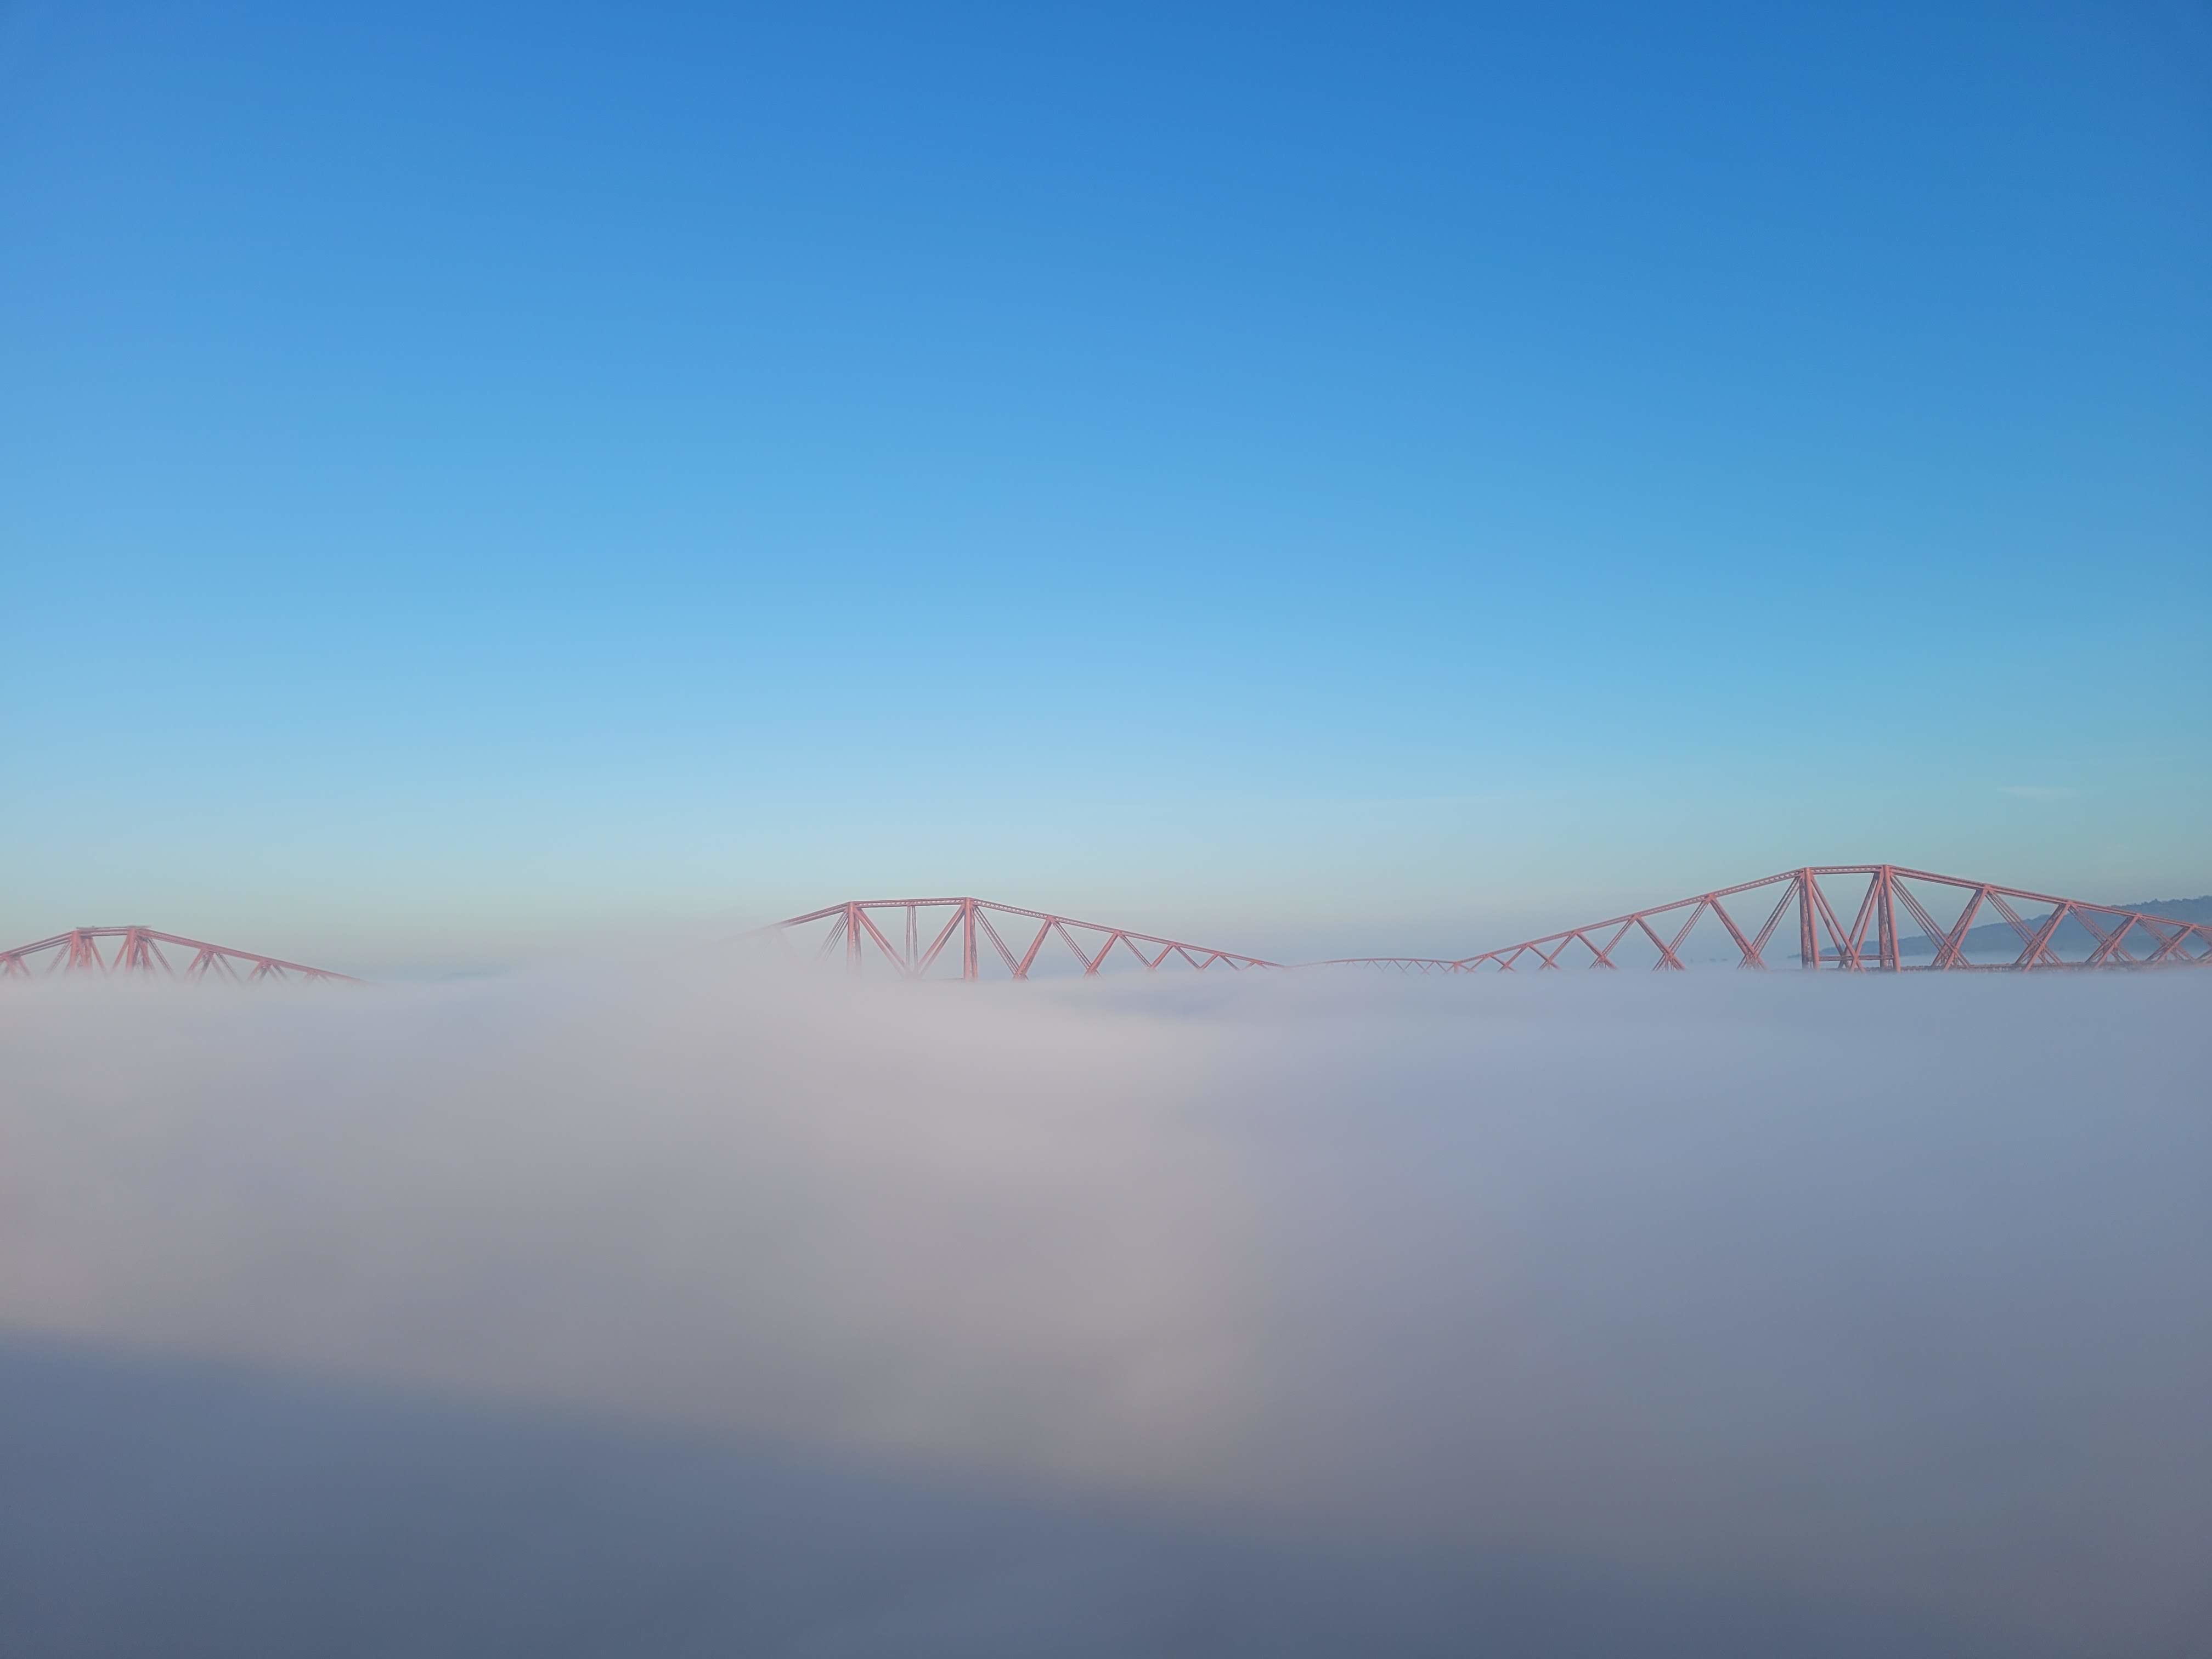 A photograph of the Forth Bridge emerging from thick cloud.